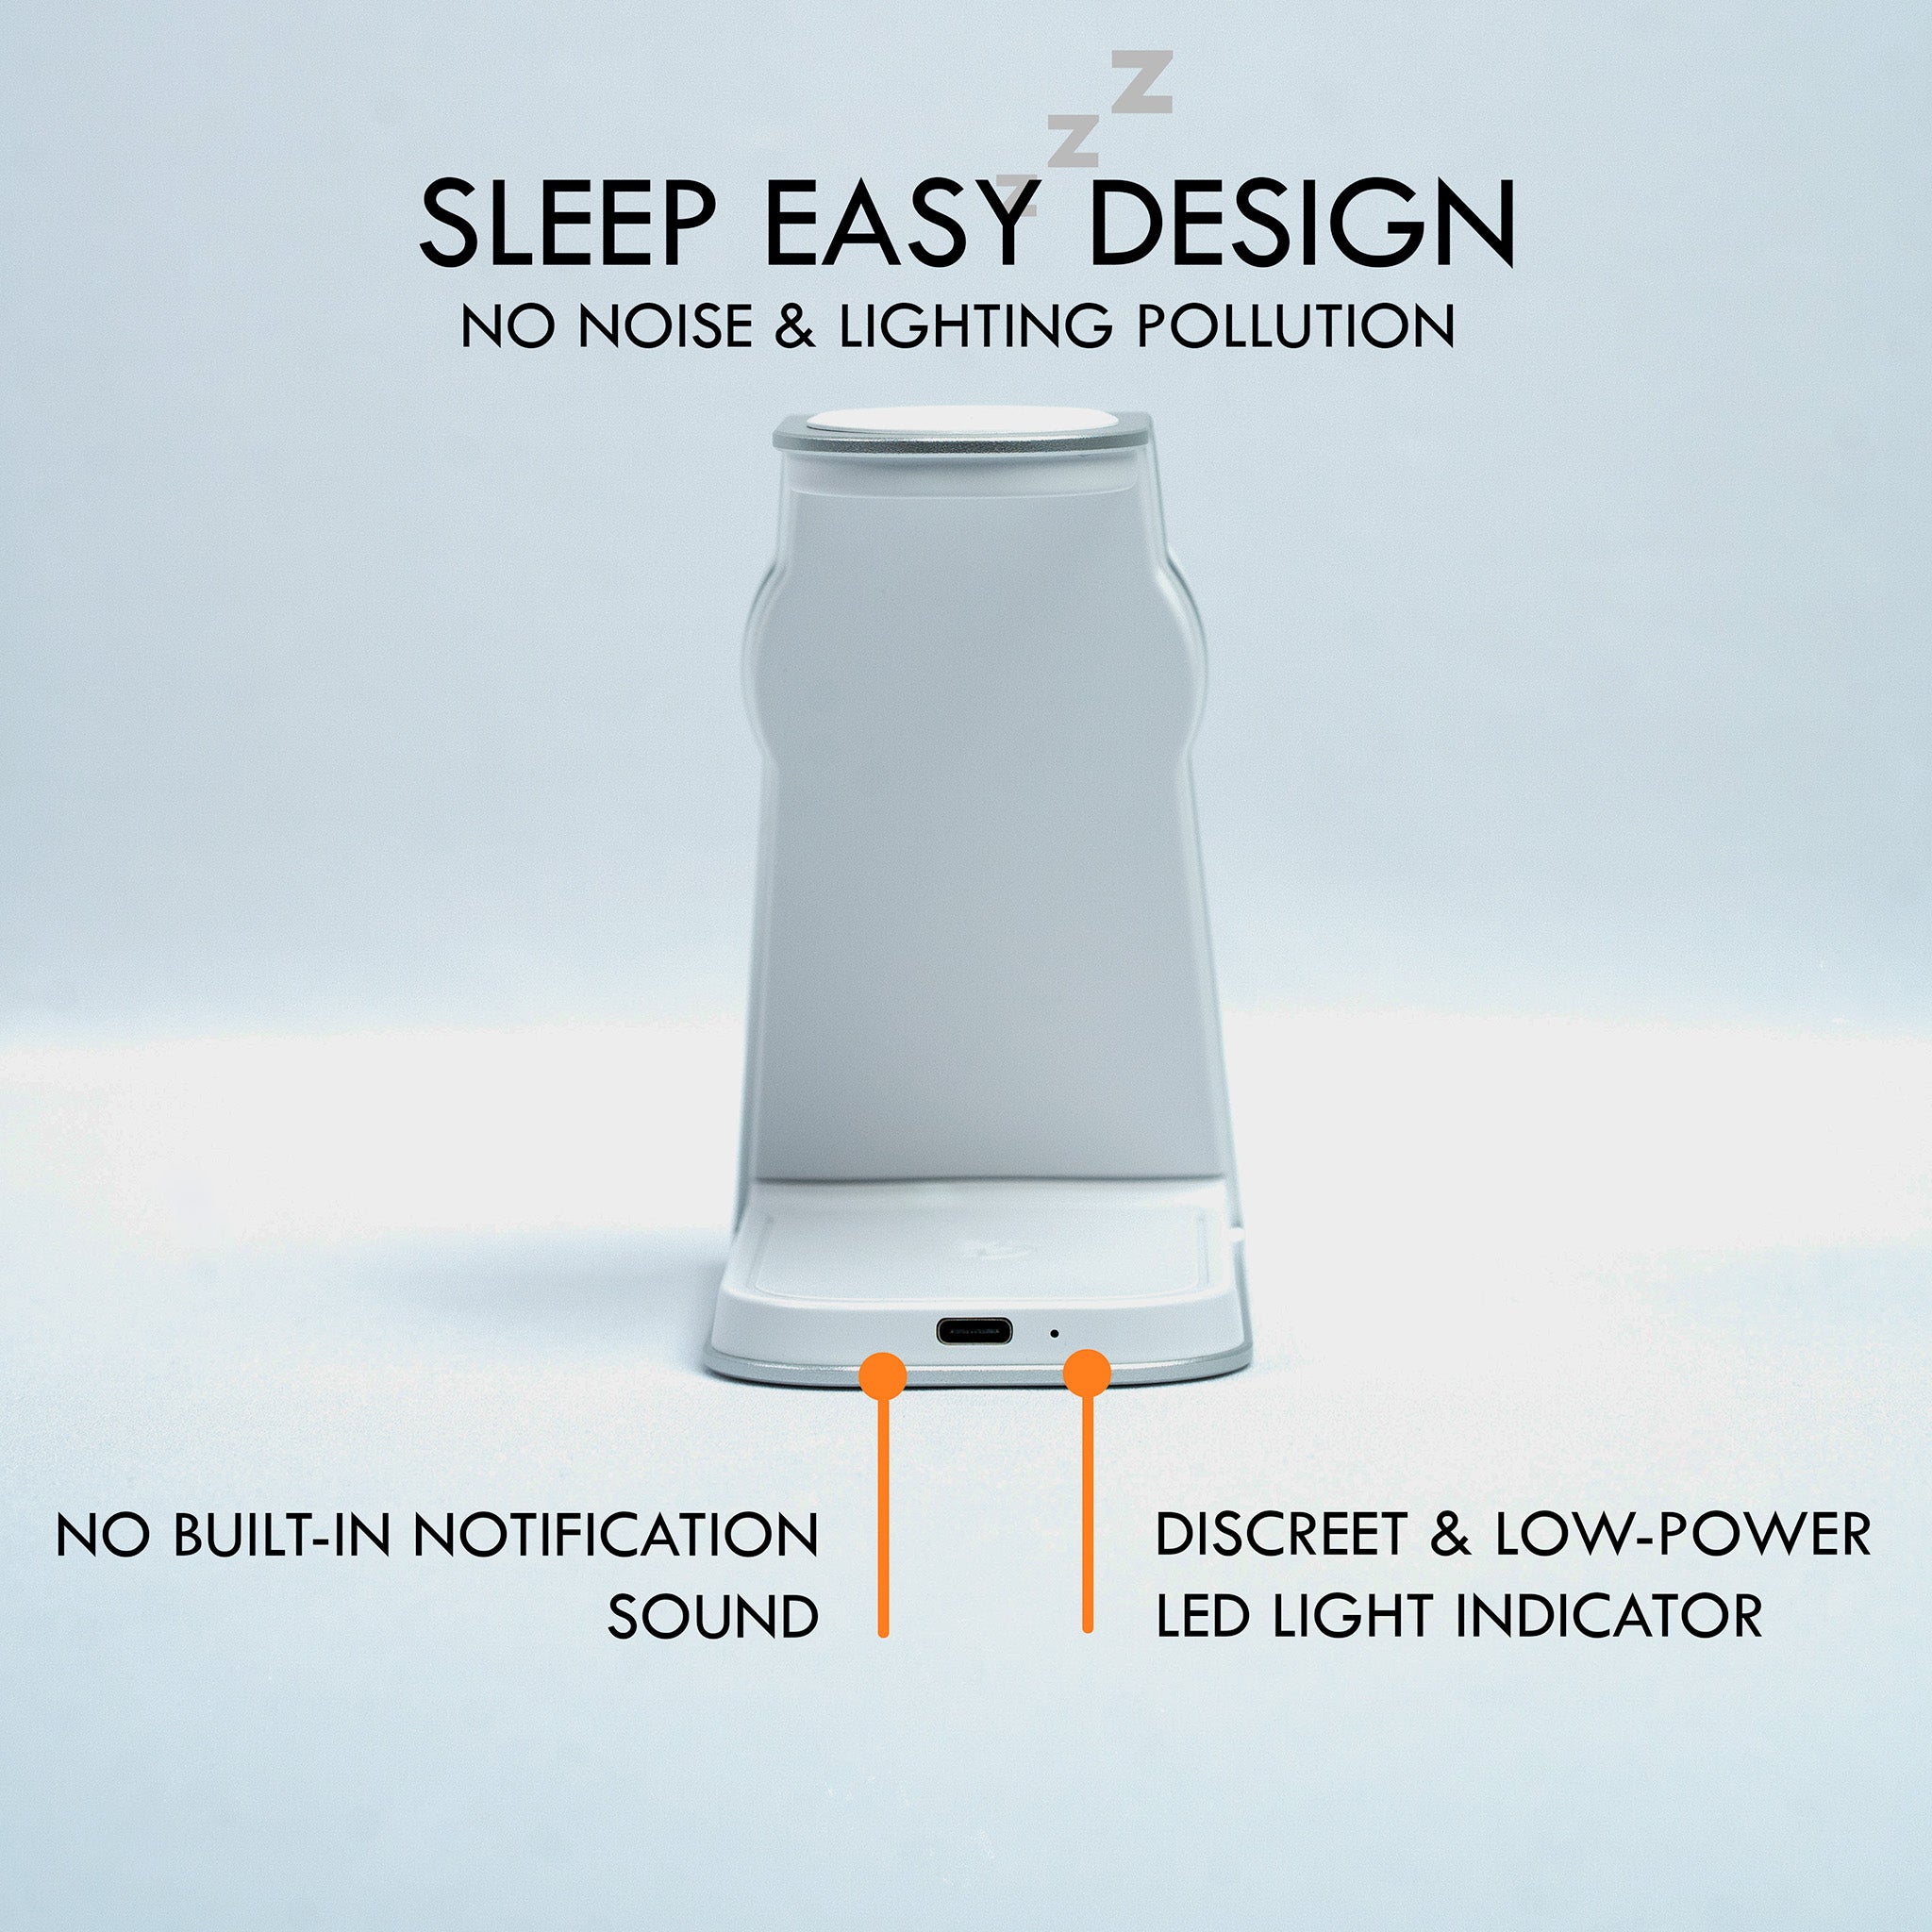 The Magnitis MagSafe 3-in-1 Charging Station highlighted for its 'Sleep Easy Design' with no noise and light pollution features, showcasing a discreet LED indicator and absence of notification sounds."